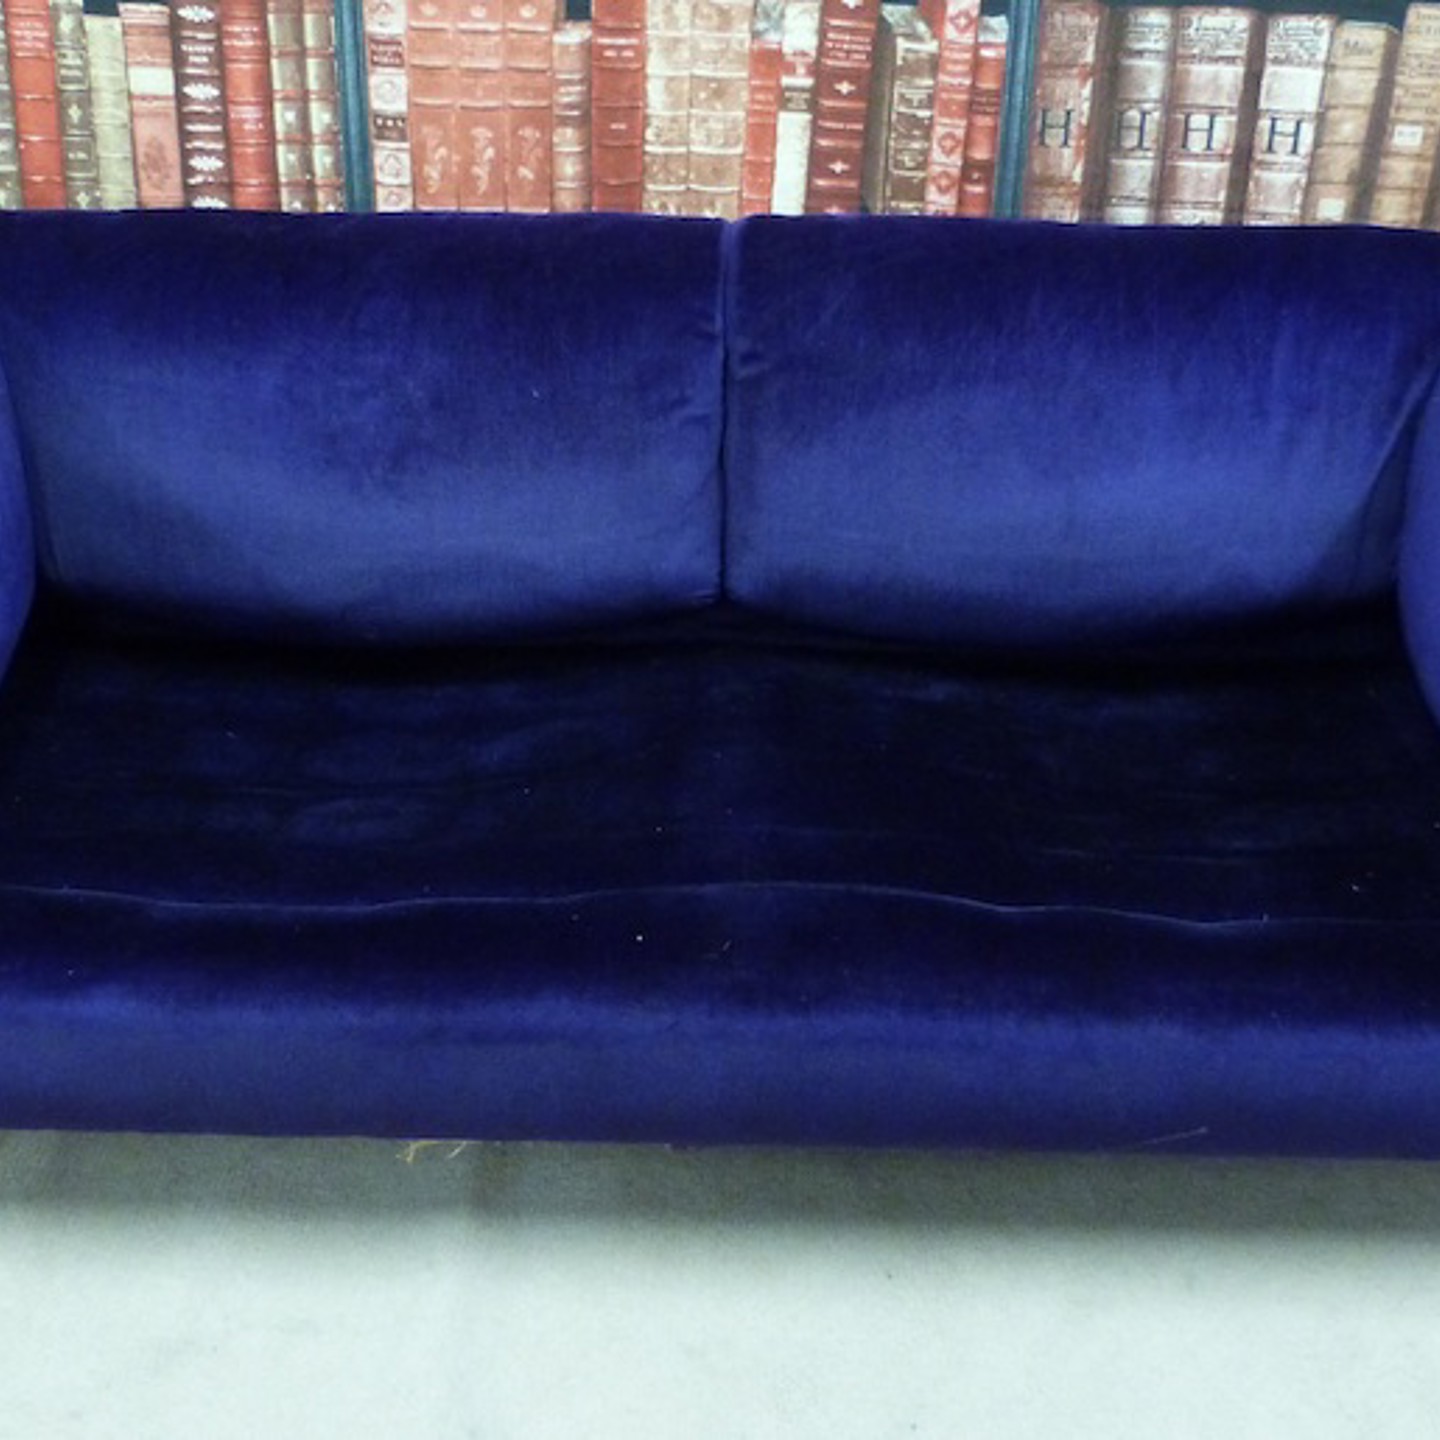 A Late Victorian Edwardian Howard Sofa With Impressed Marks To Back Legs Ś4000